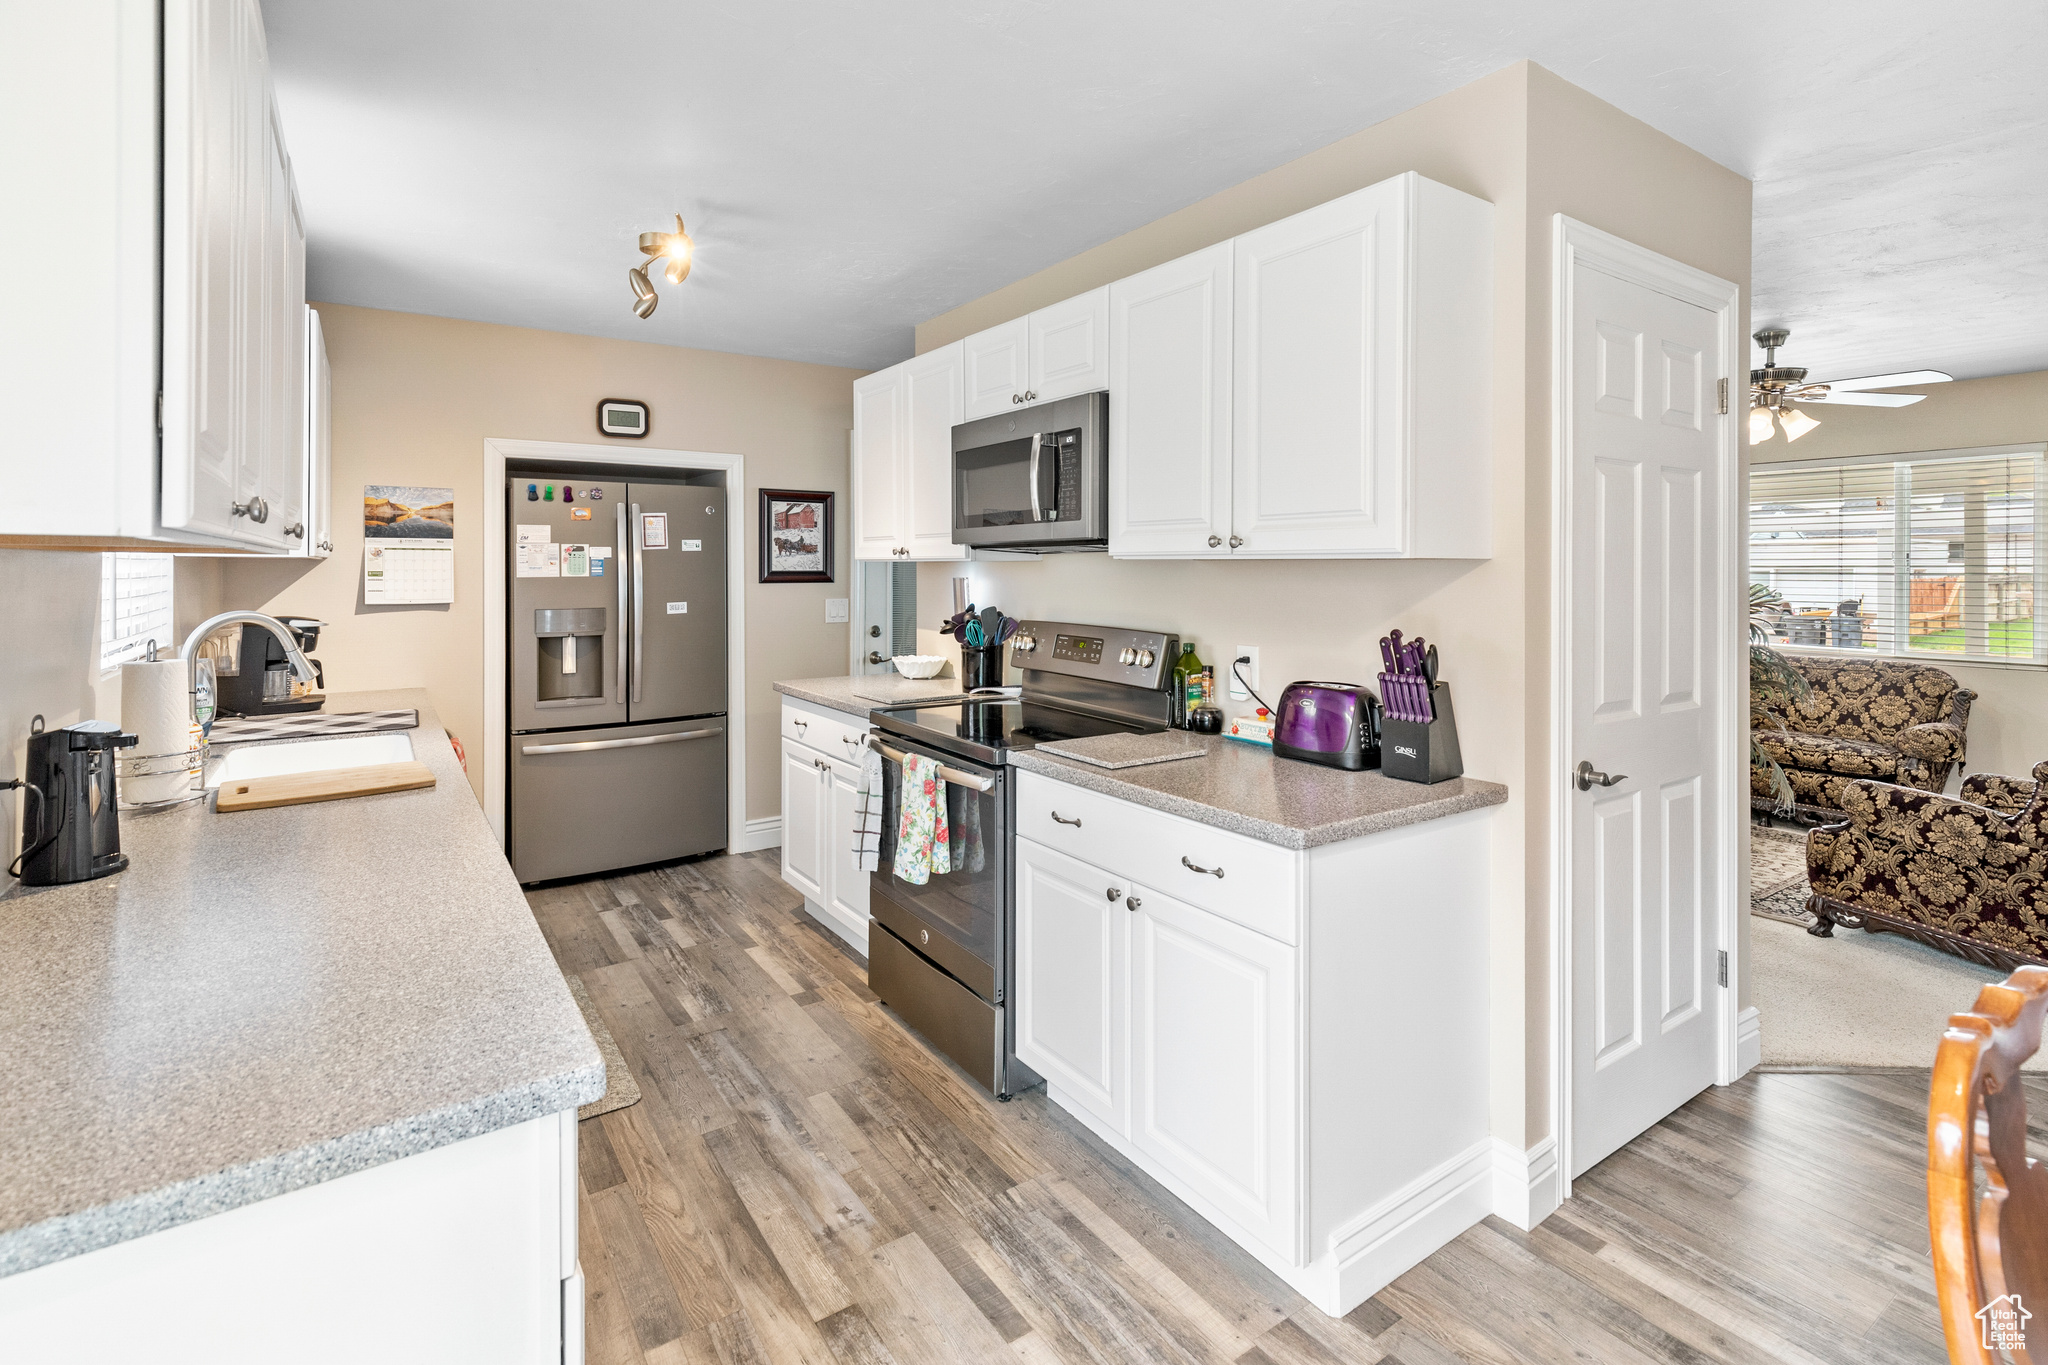 Kitchen featuring light hardwood / wood-style floors, appliances with stainless steel finishes, white cabinetry, and sink